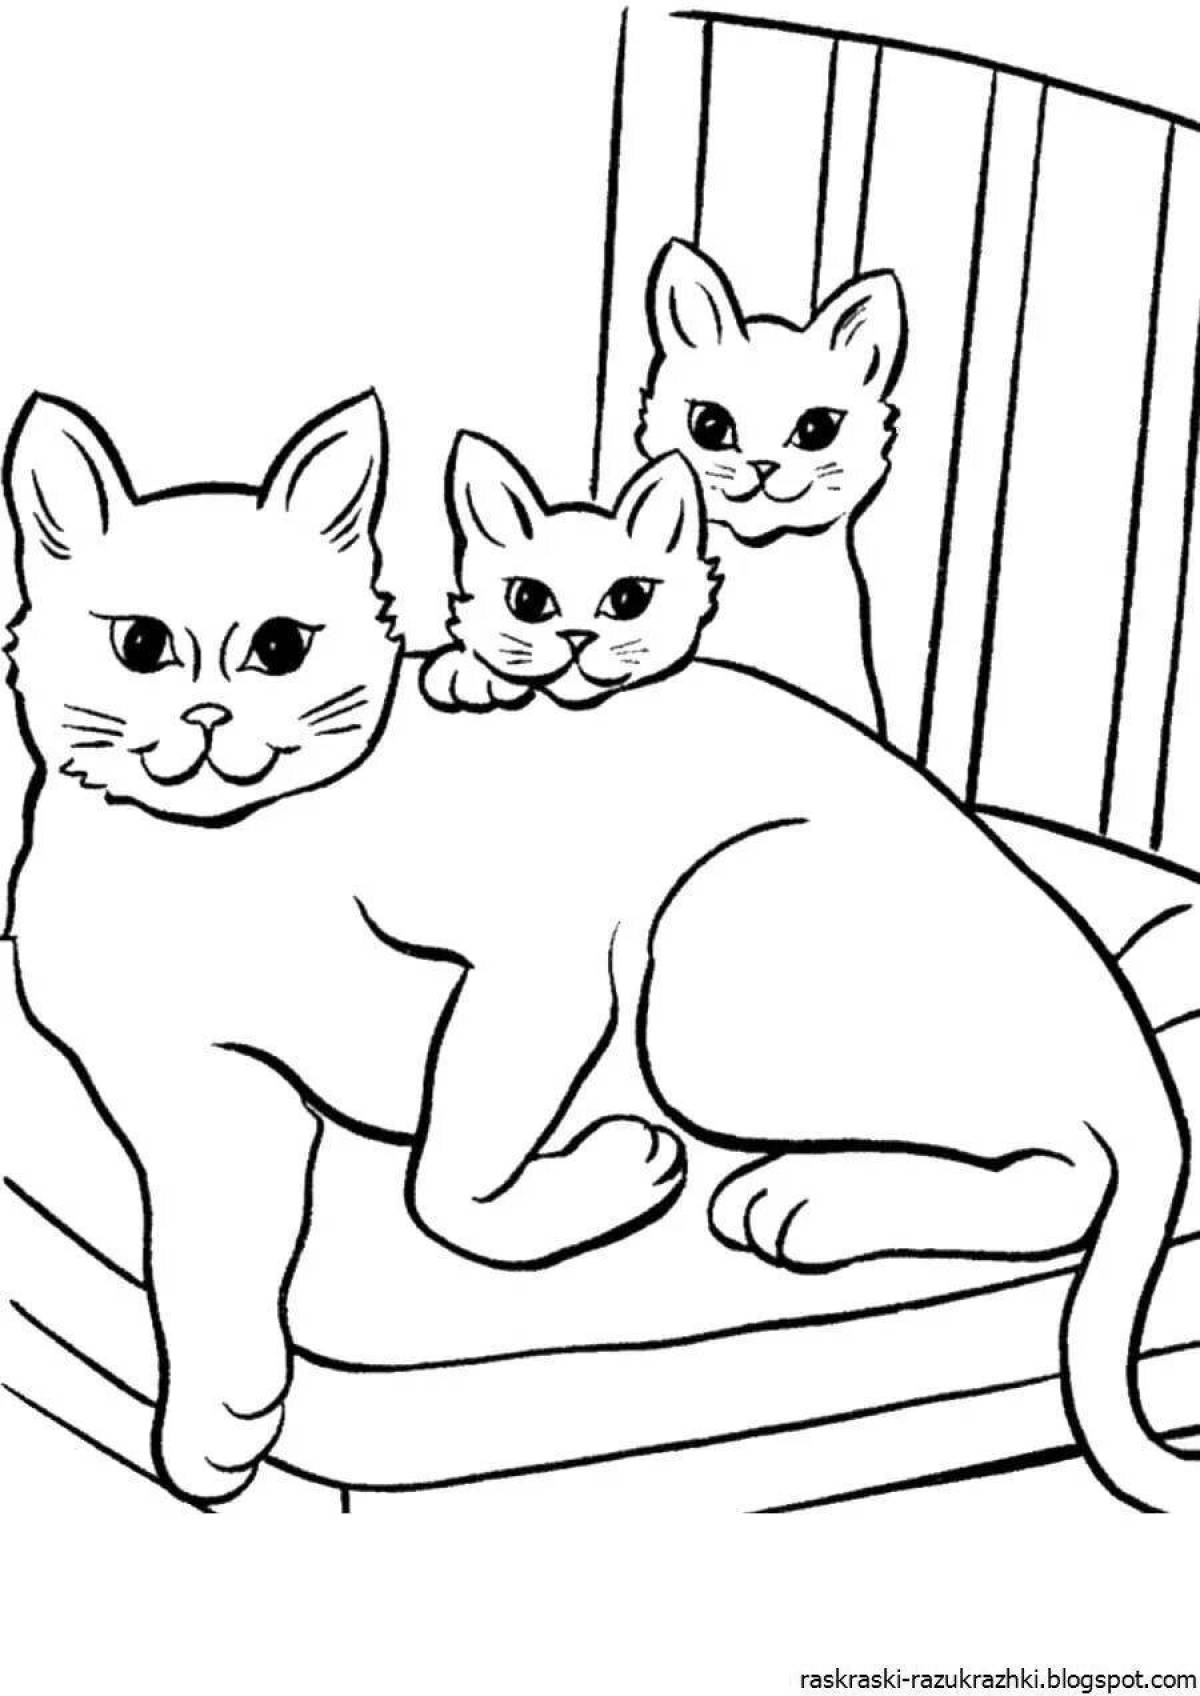 Exquisite cat and kitten coloring book for girls